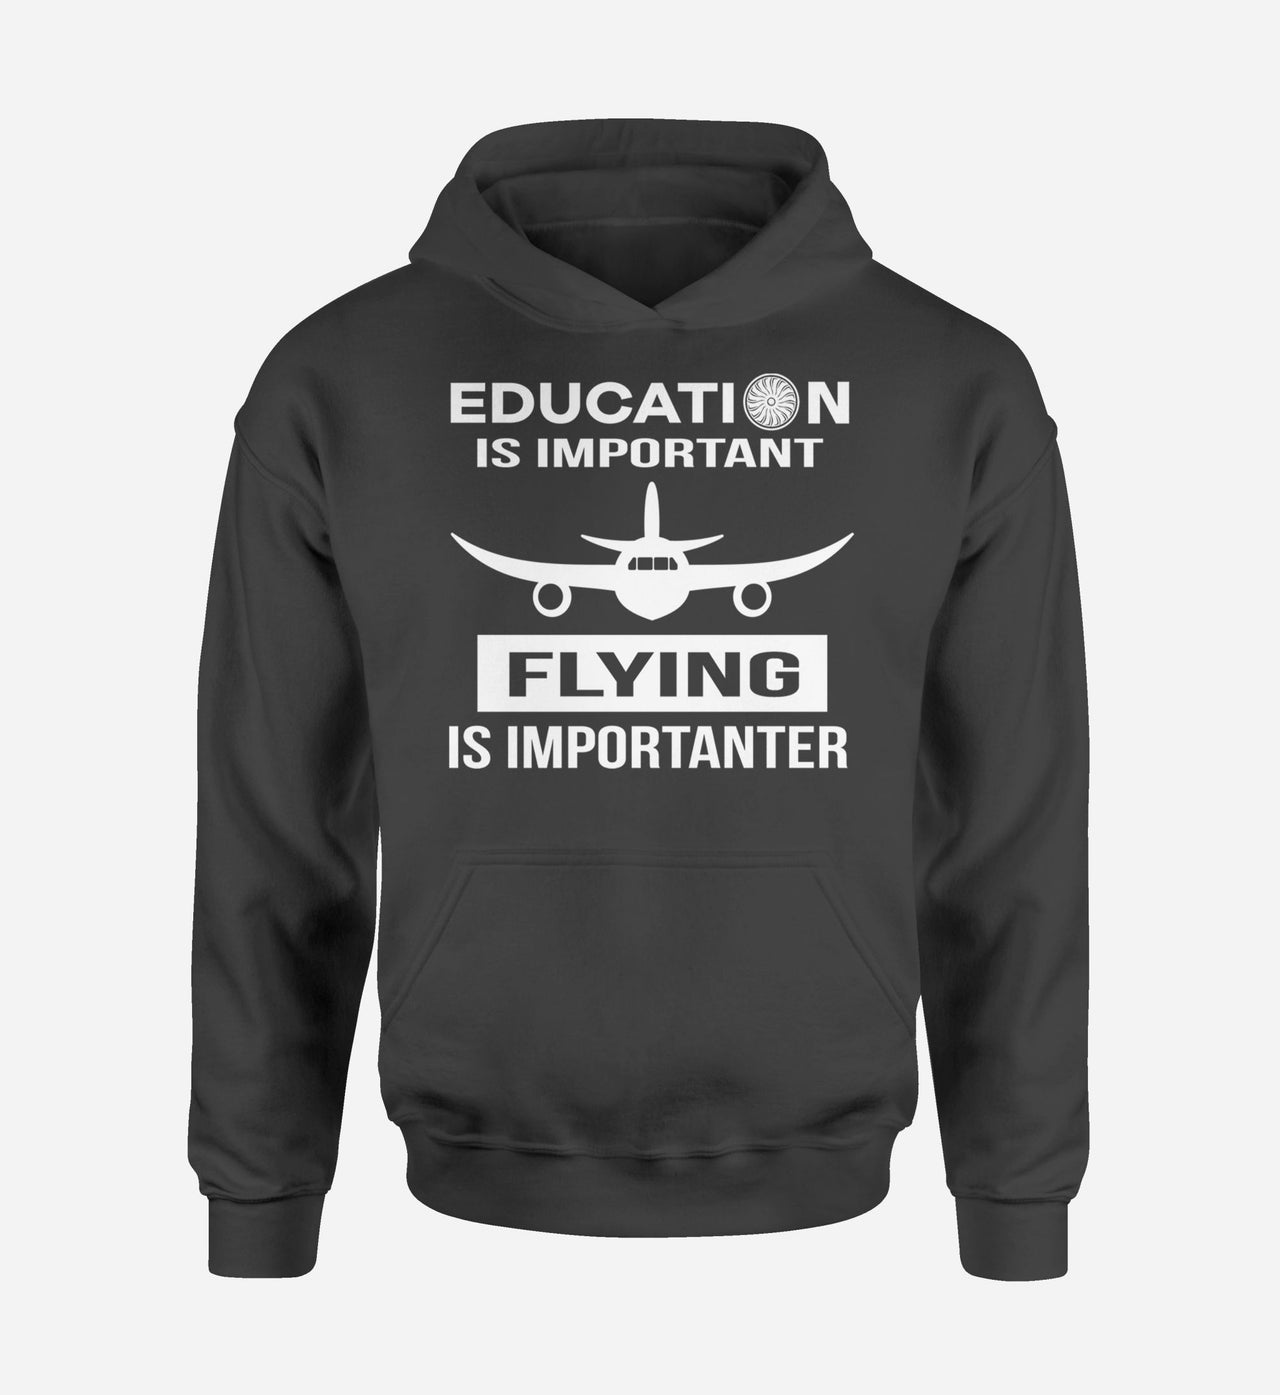 Flying is Importanter Designed Hoodies